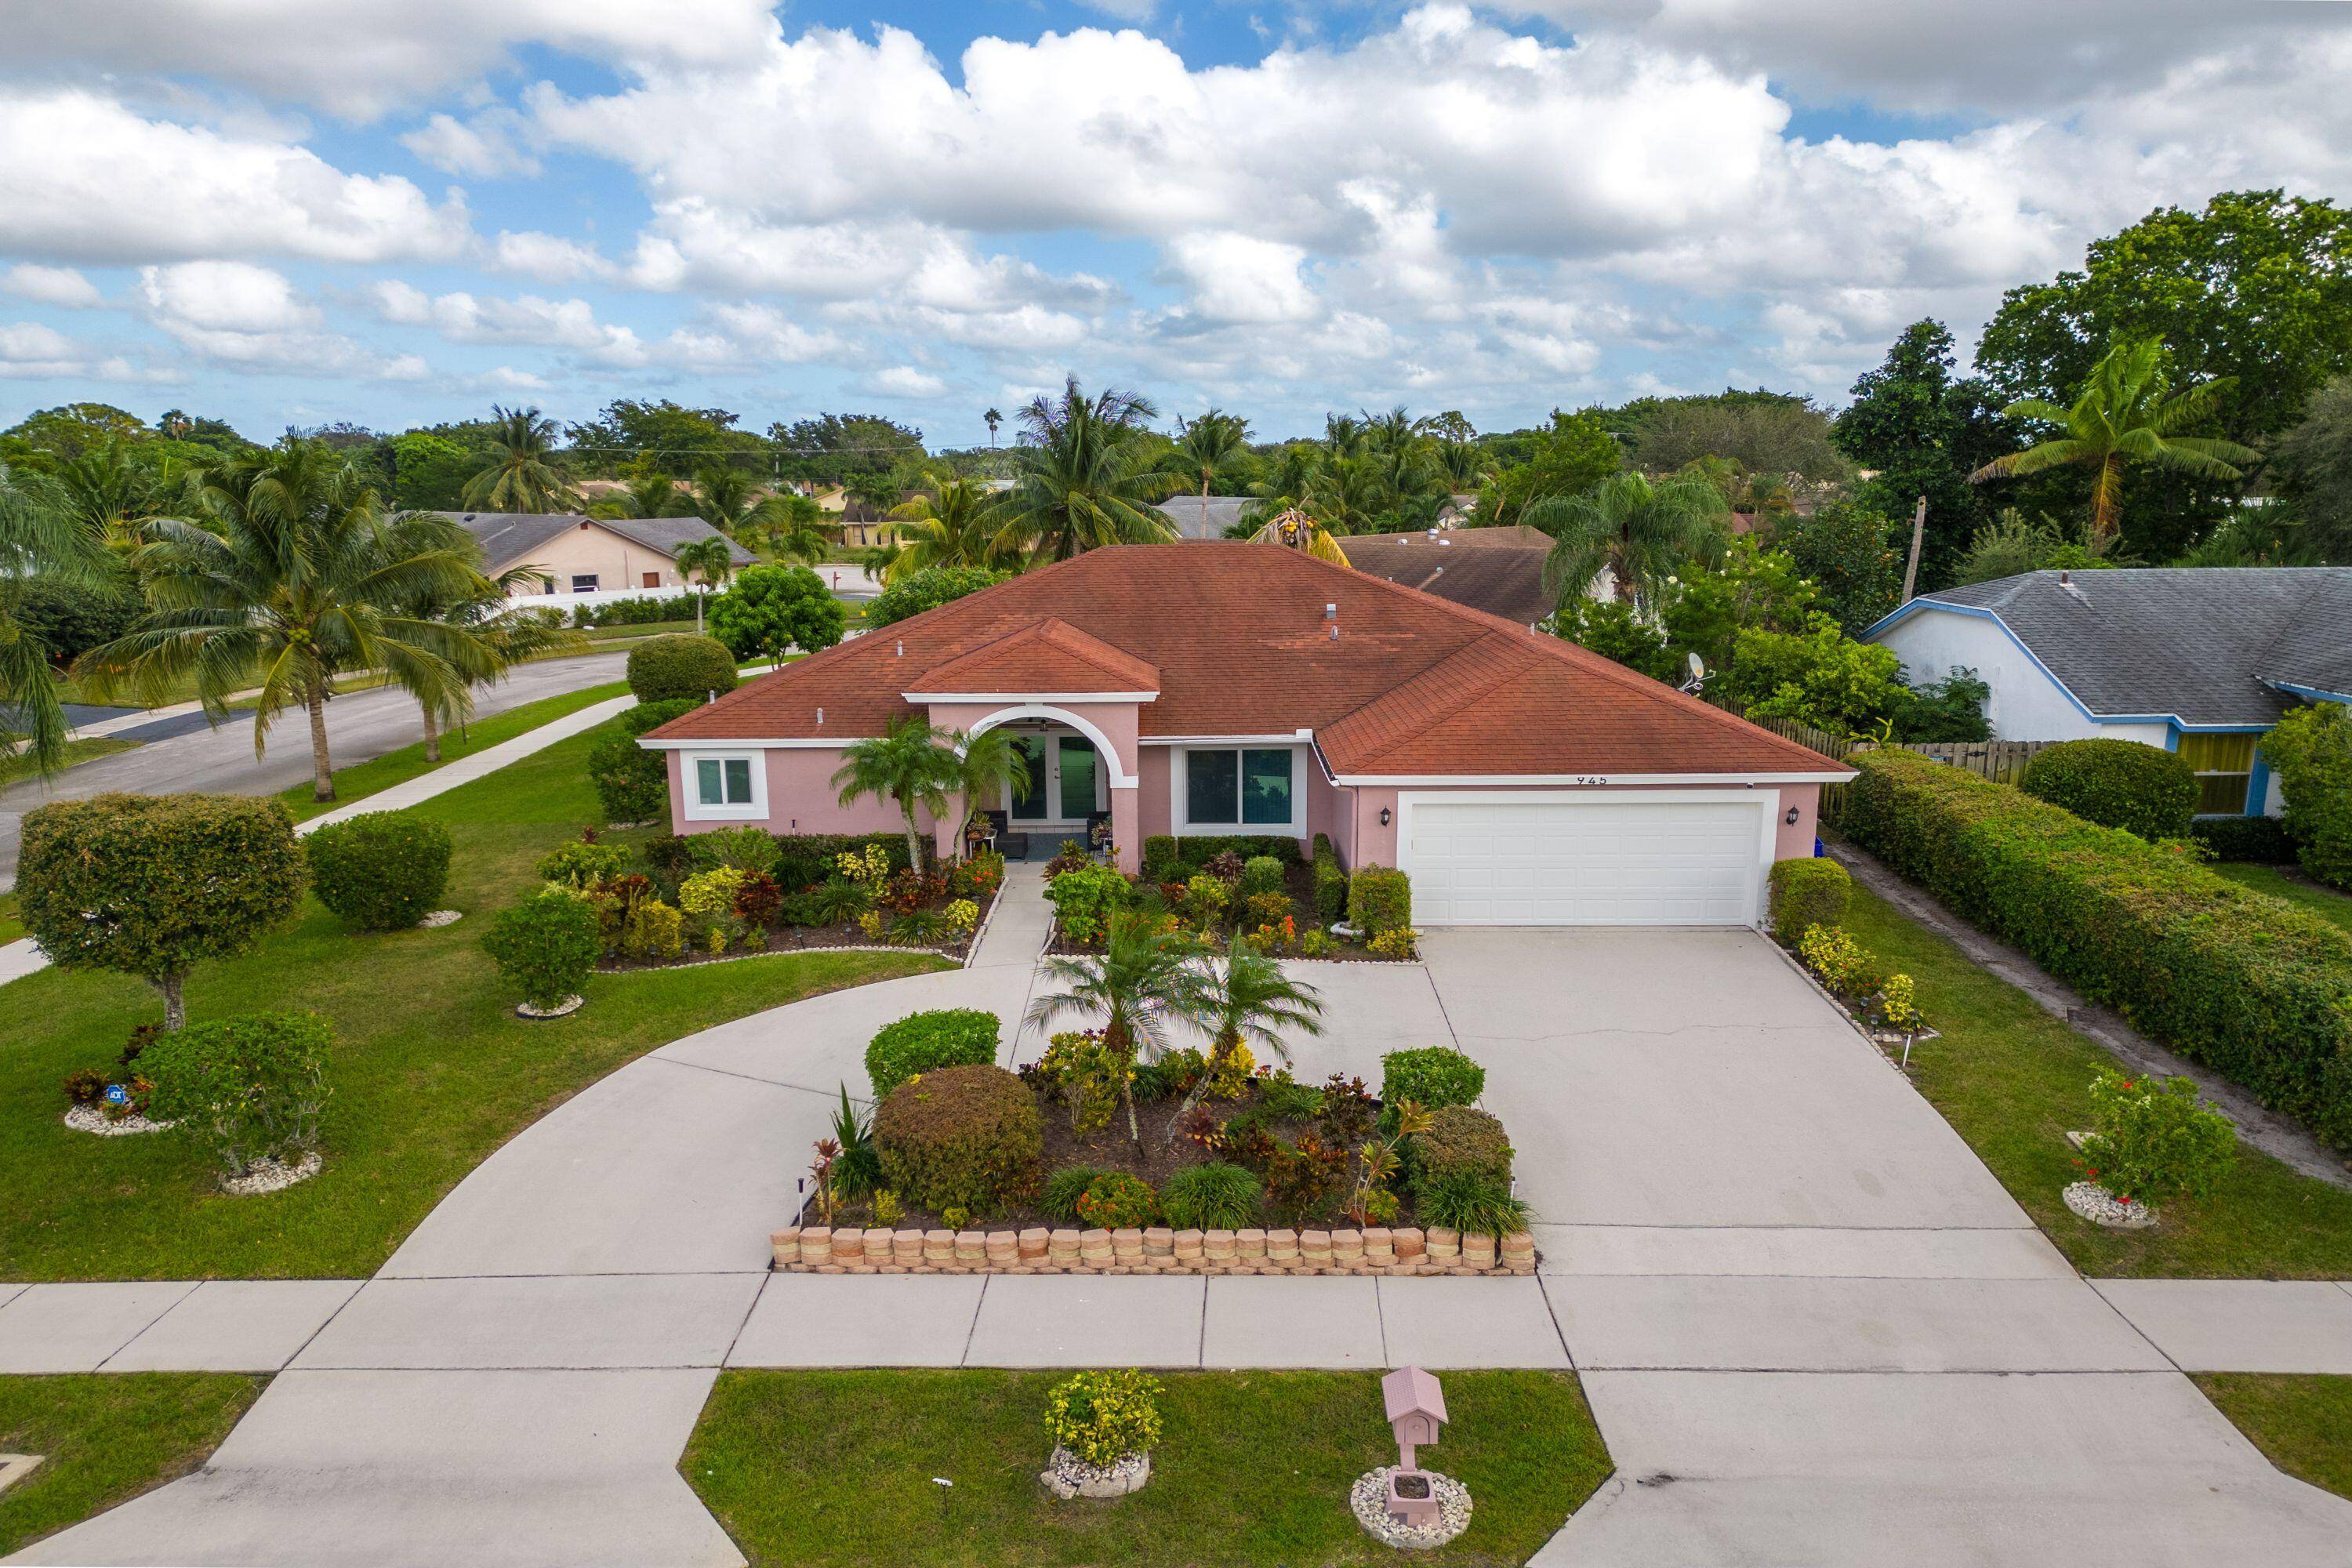 This spacious 3 bedroom, 2 bathroom, 2 car garage is a 5 minutes drive to I 95 and just 10 minutes drive to downtown Delray and its stunning beaches.